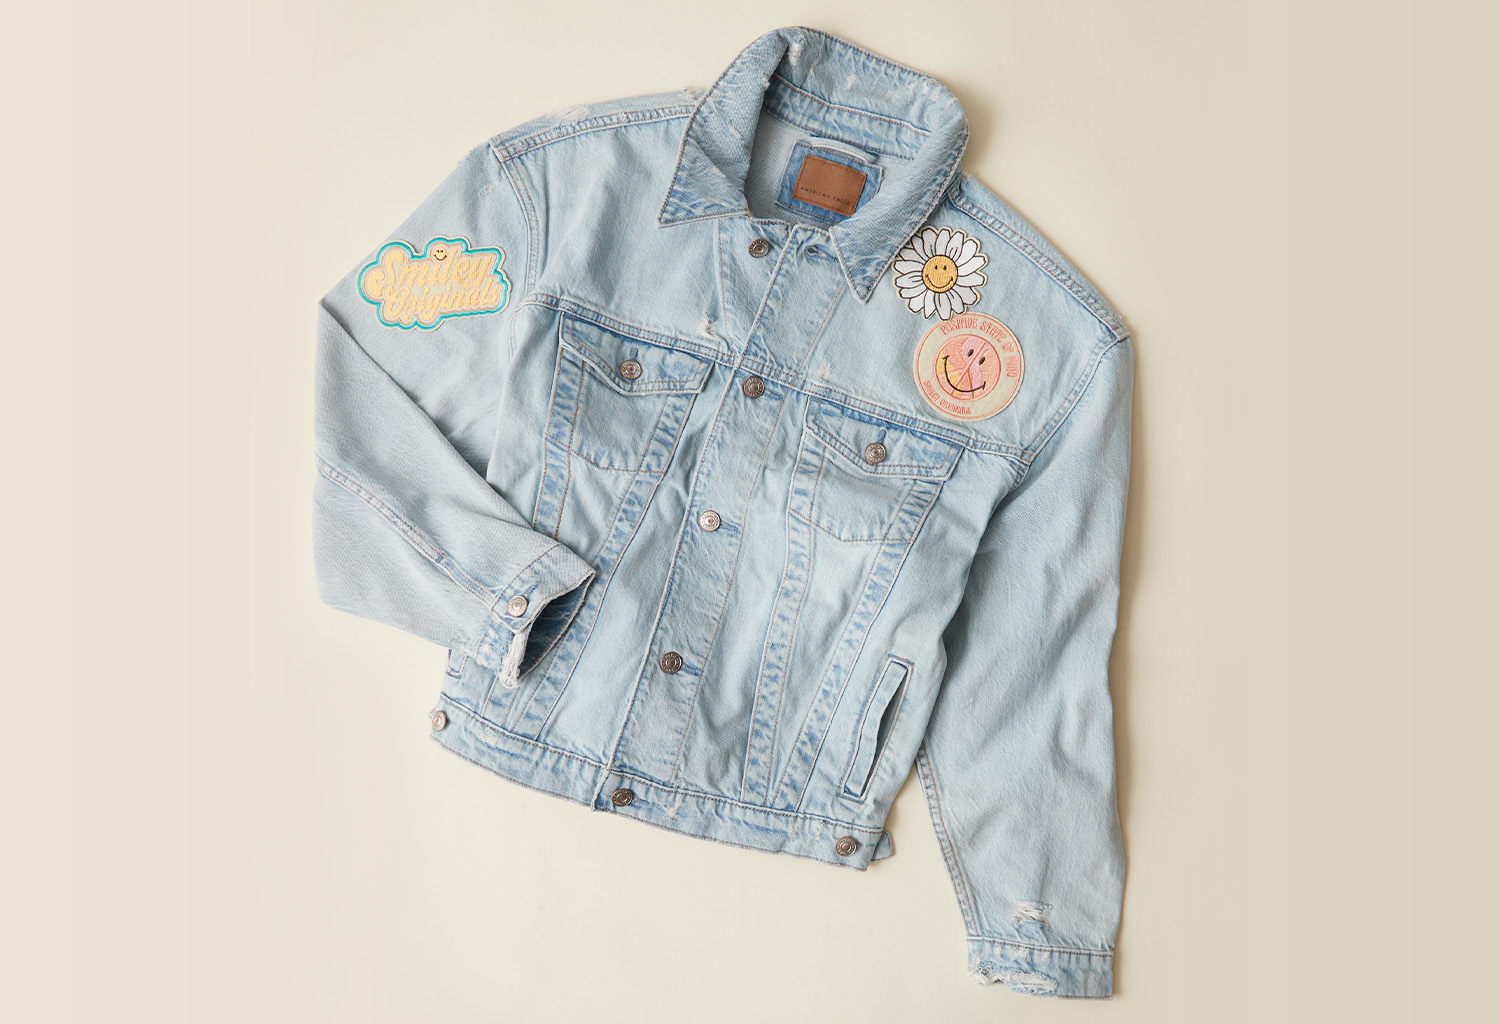 Cool Iron-On Patches to Customize a Denim Jacket